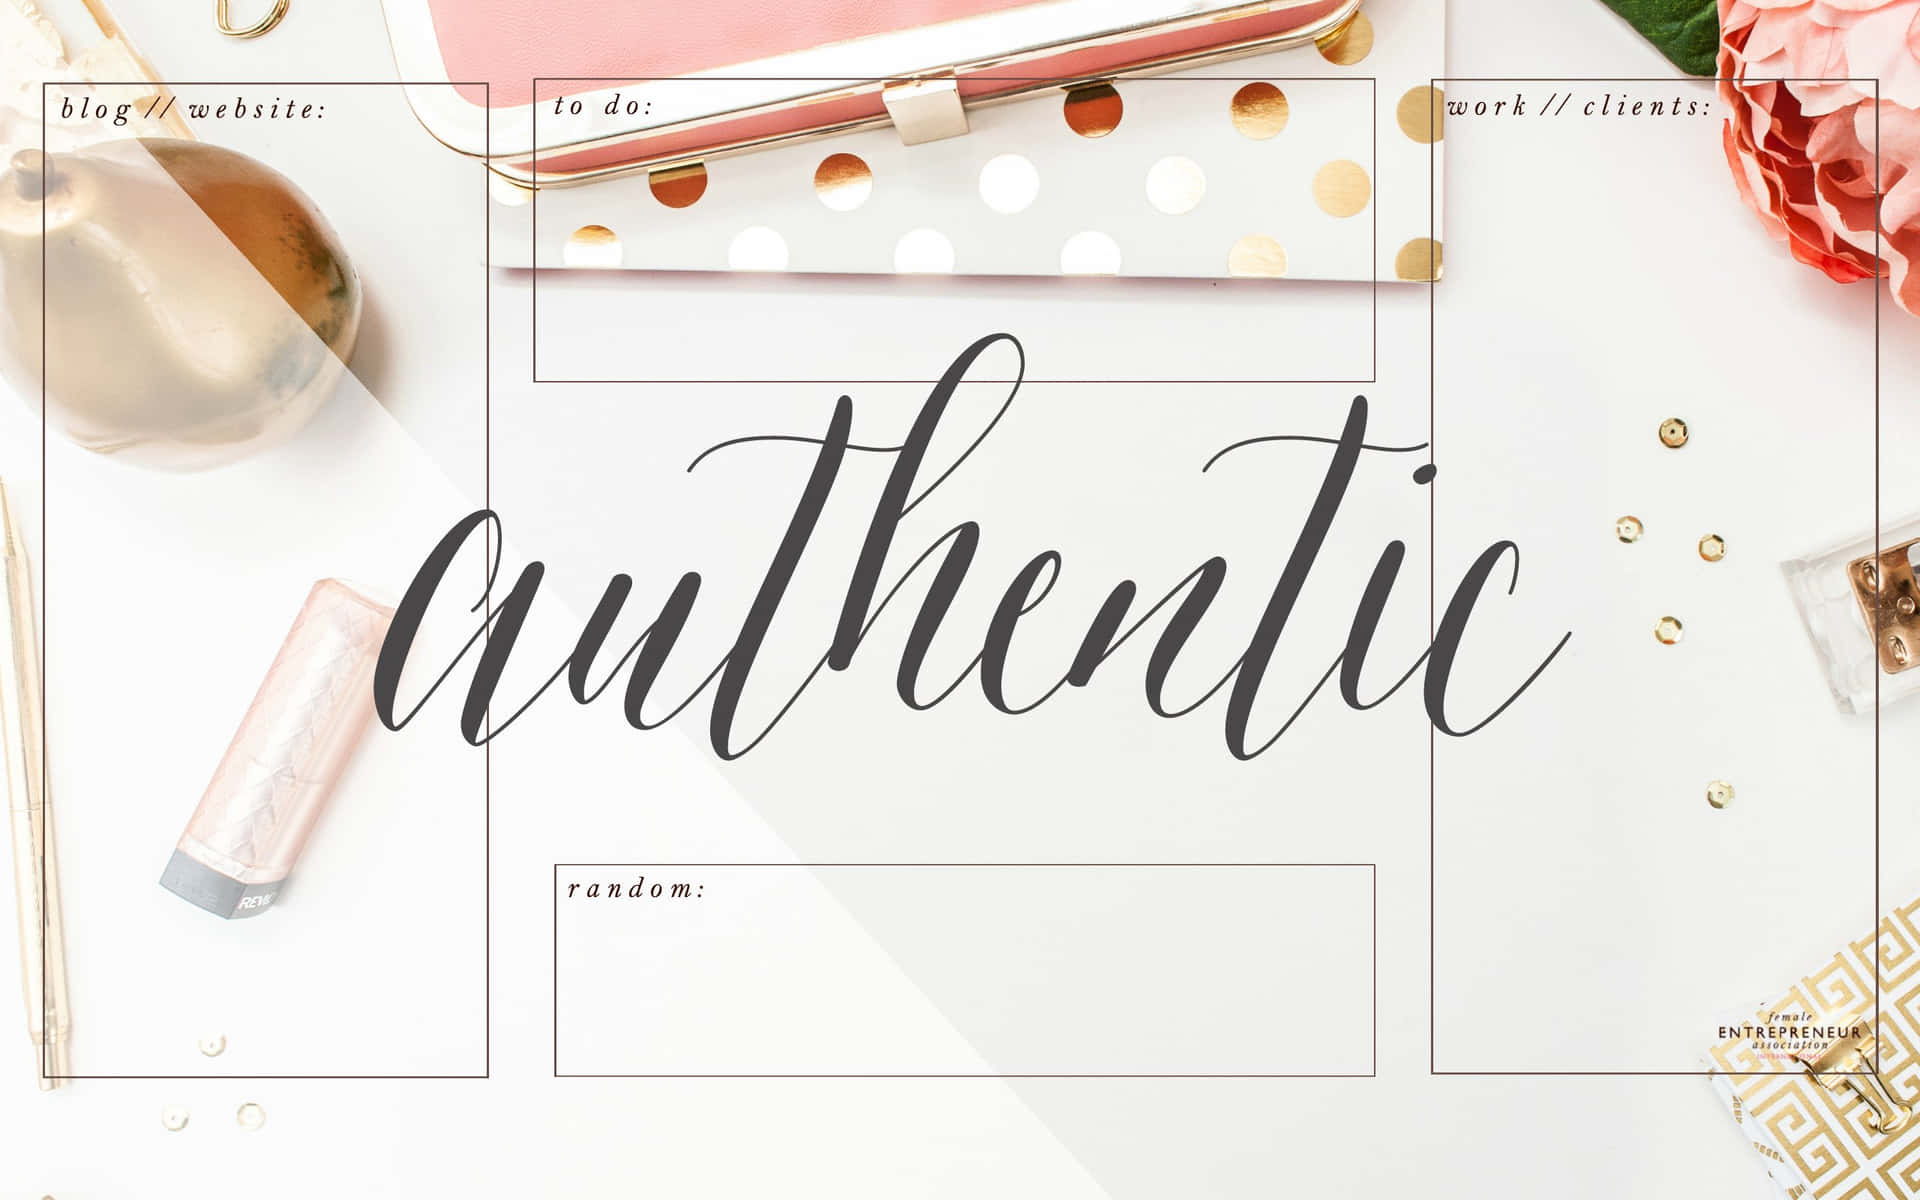 Be Authentic and Rely on Yourself